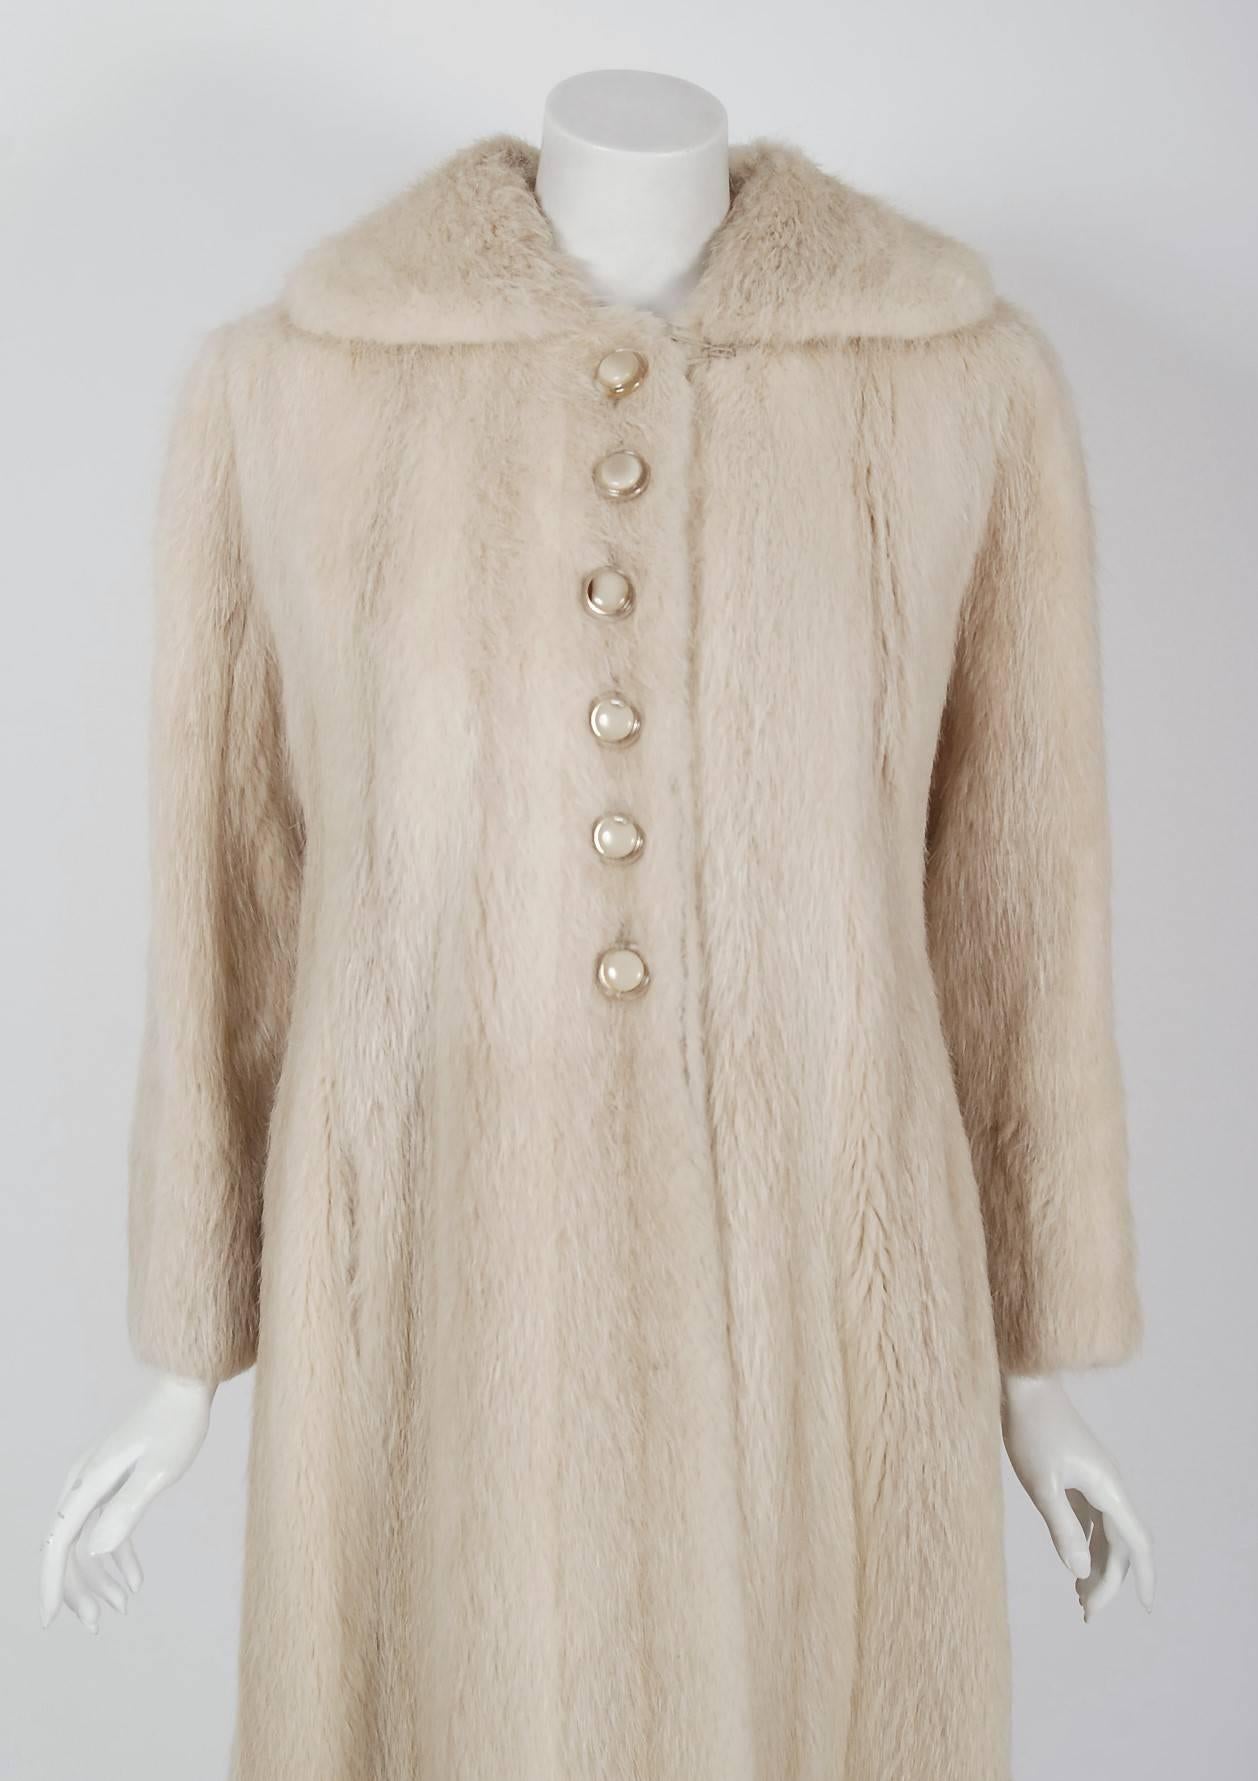 This exquisite Pierre Cardin Couture genuine mink-fur stroller, dating back to his 1964 collection, will make any woman shine during cold winter months. The soft blonde mink been worked into vertical panels and the effect is really breathtaking. The